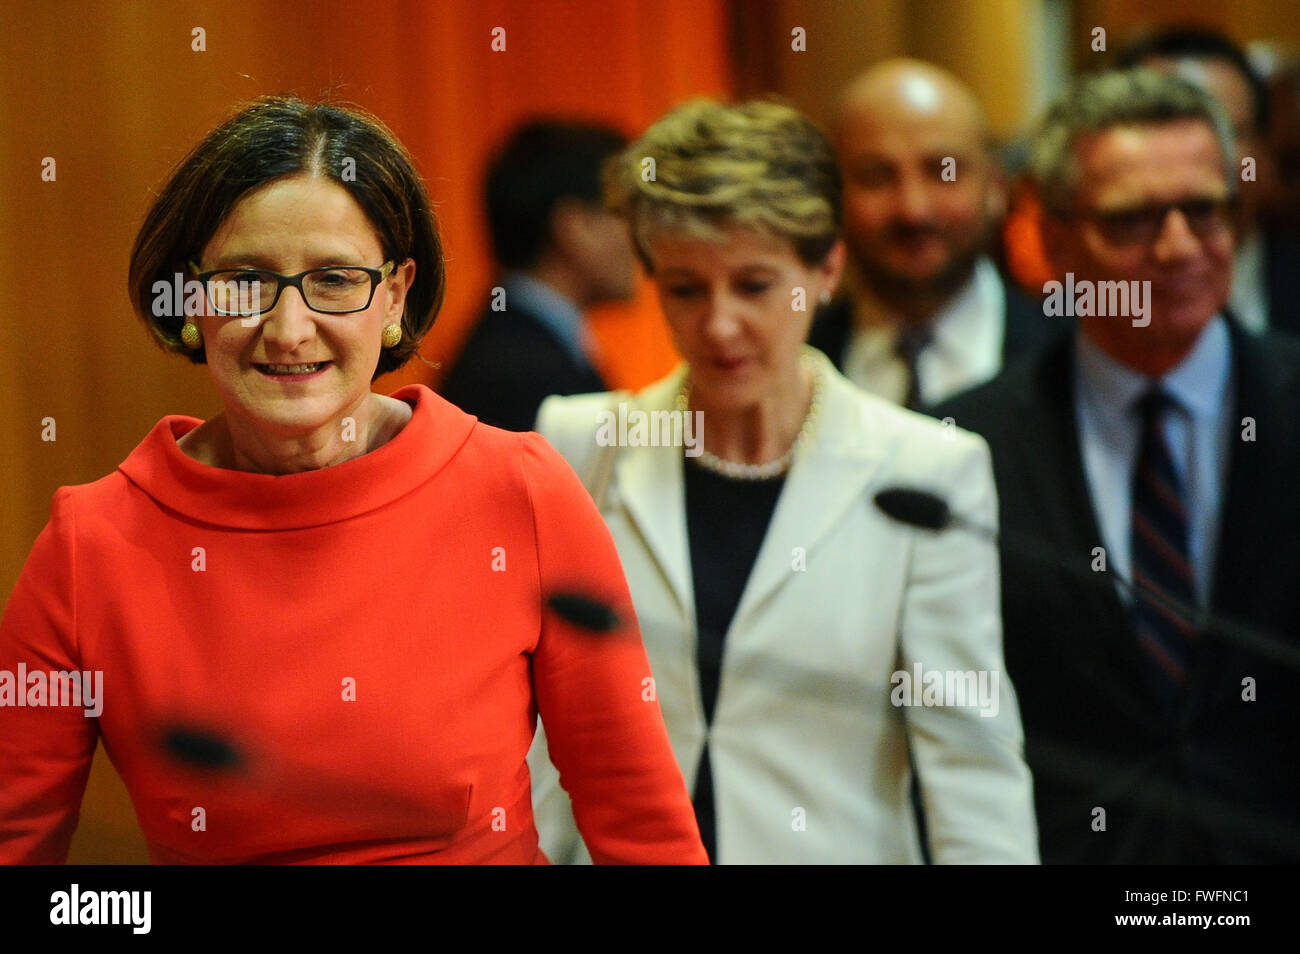 Vienna, Austria. 5th Apr, 2016. (L-R) Austrian Interior Minister Johanna Mikl-Leitner, Swiss Justice Minister Simonetta Sommaruga and German Interior Minister Thomas de Maiziere arrive for a press conference in Vienna, Austria, April 5, 2016. Government officials of Austria, Germany, Liechtenstein, Luxembourg and Switzerland held a meeting in Vienna on Tuesday to discuss issues related to refugees. © Qian Yi/Xinhua/Alamy Live News Stock Photo